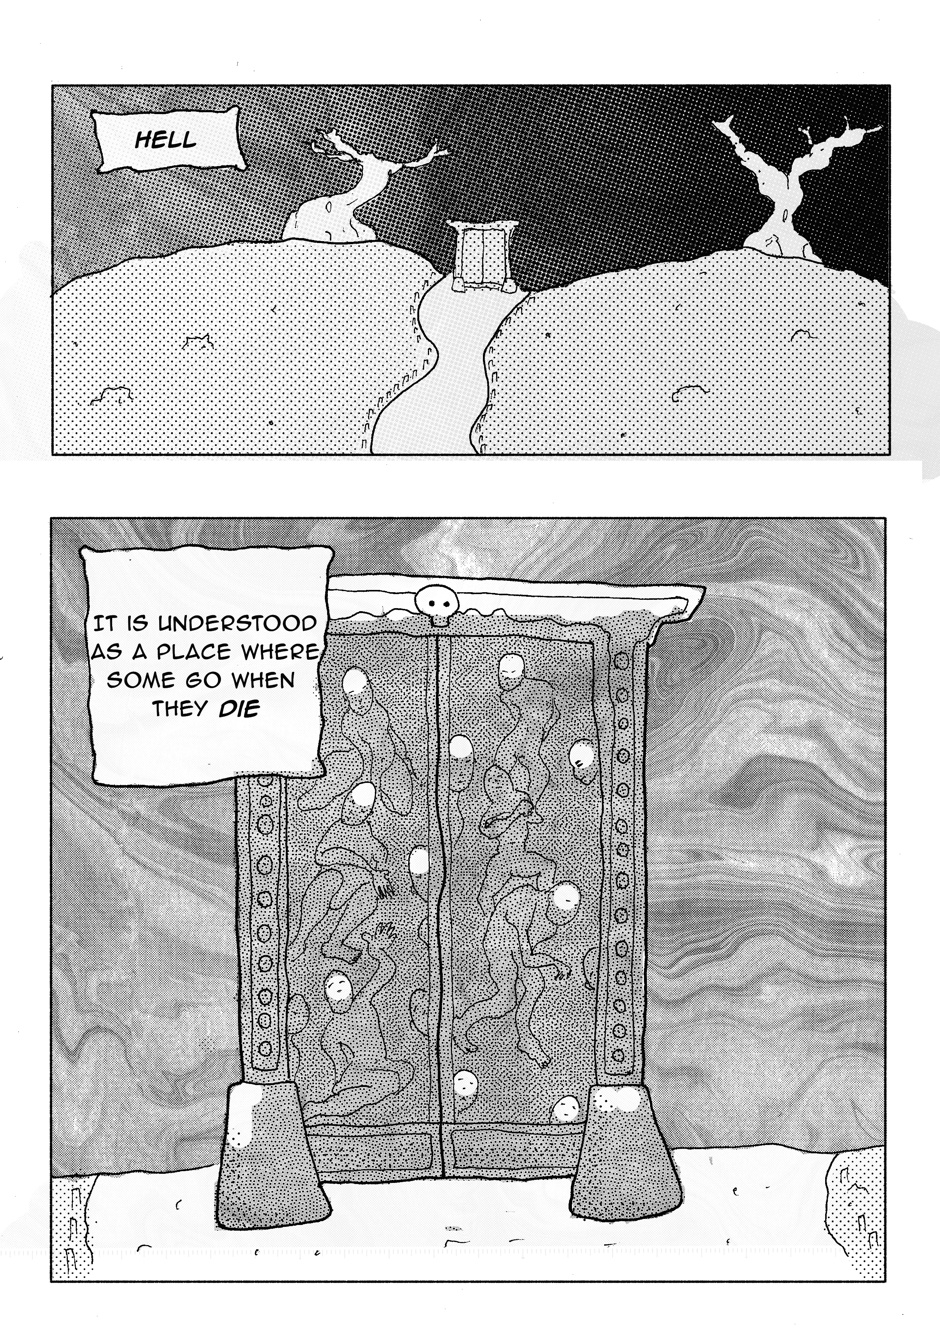 Oswald The Overman In The Lesser Planes Of Hell - Page 2